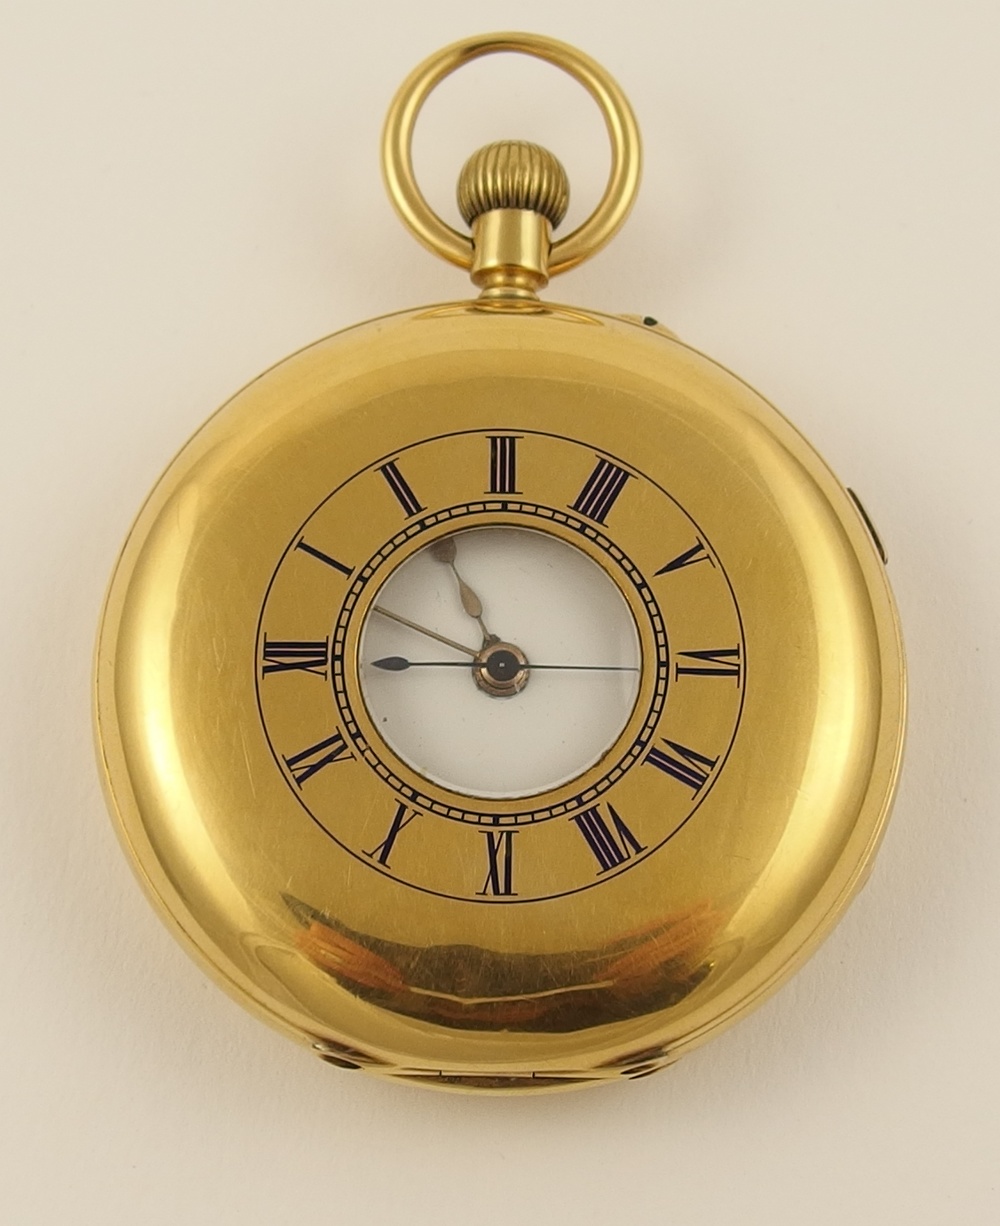 An 18ct gold half hunter pocket watch with outer case numerals picked out in blue enamel, inner